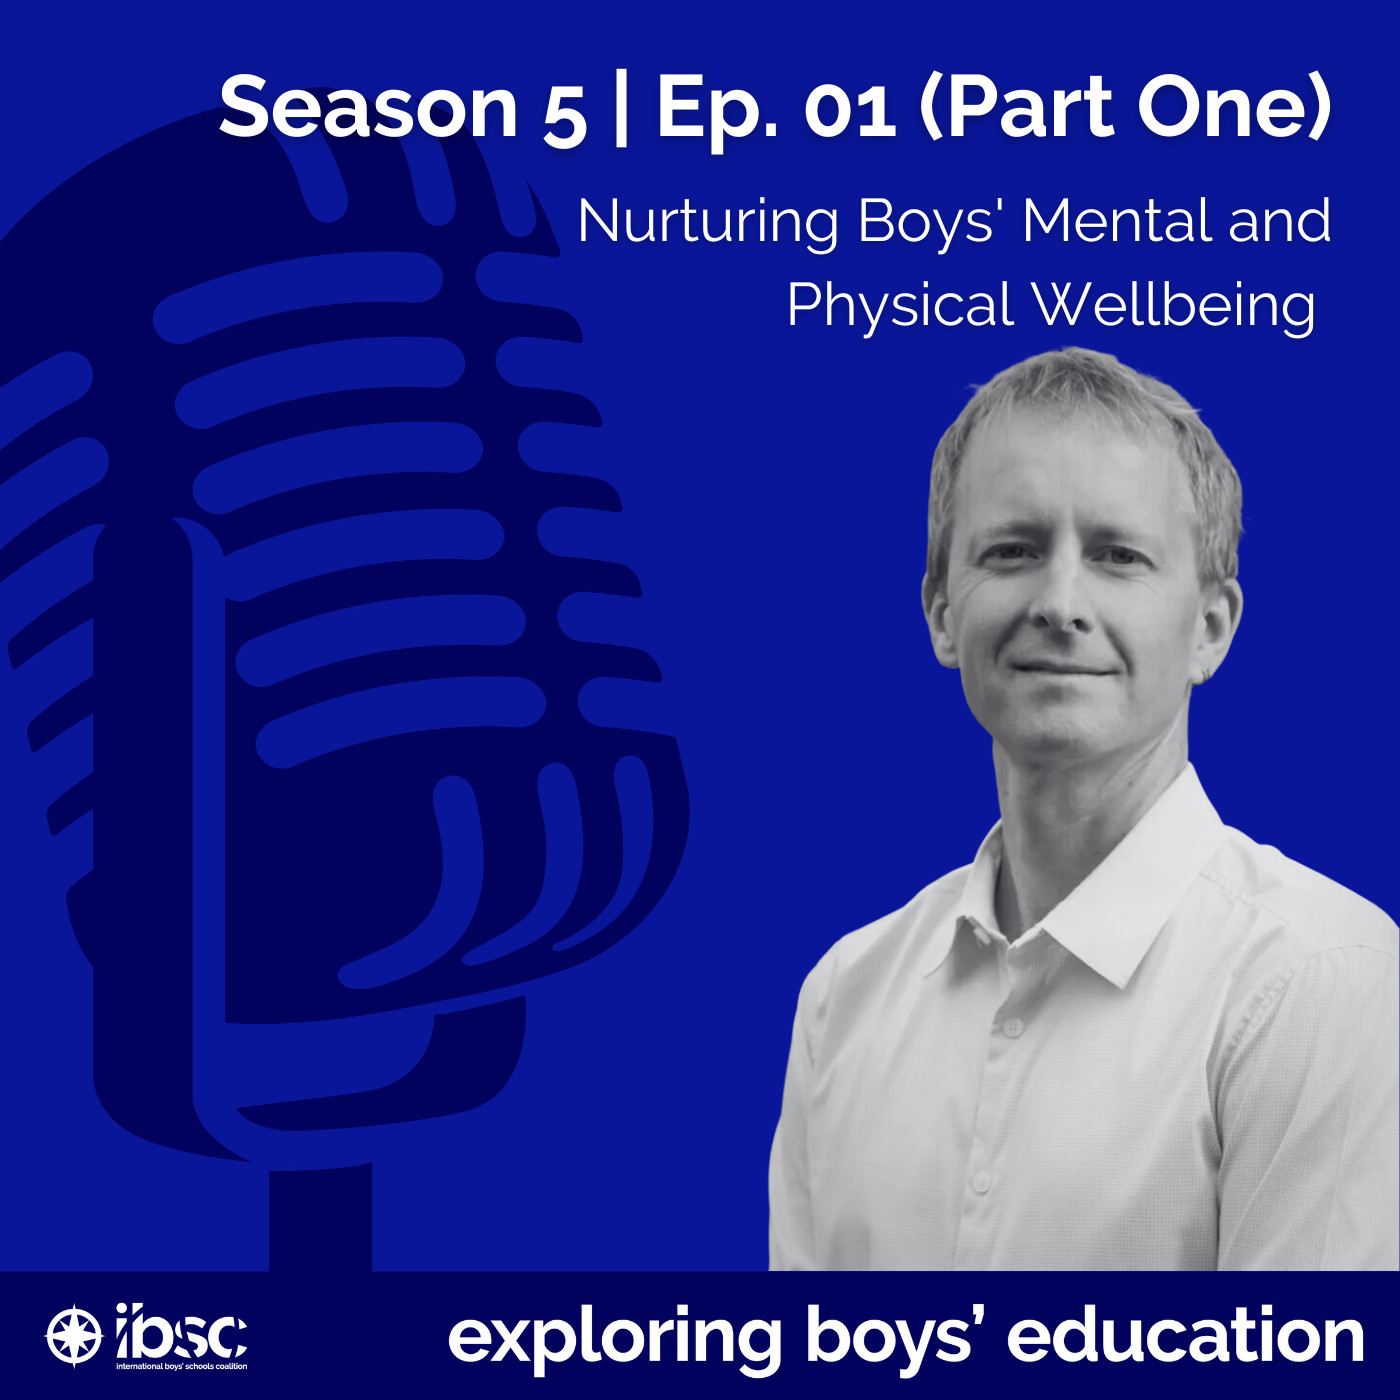 S5/Ep.01 (Part One) - Nurturing Boys' Mental and Physical Wellbeing